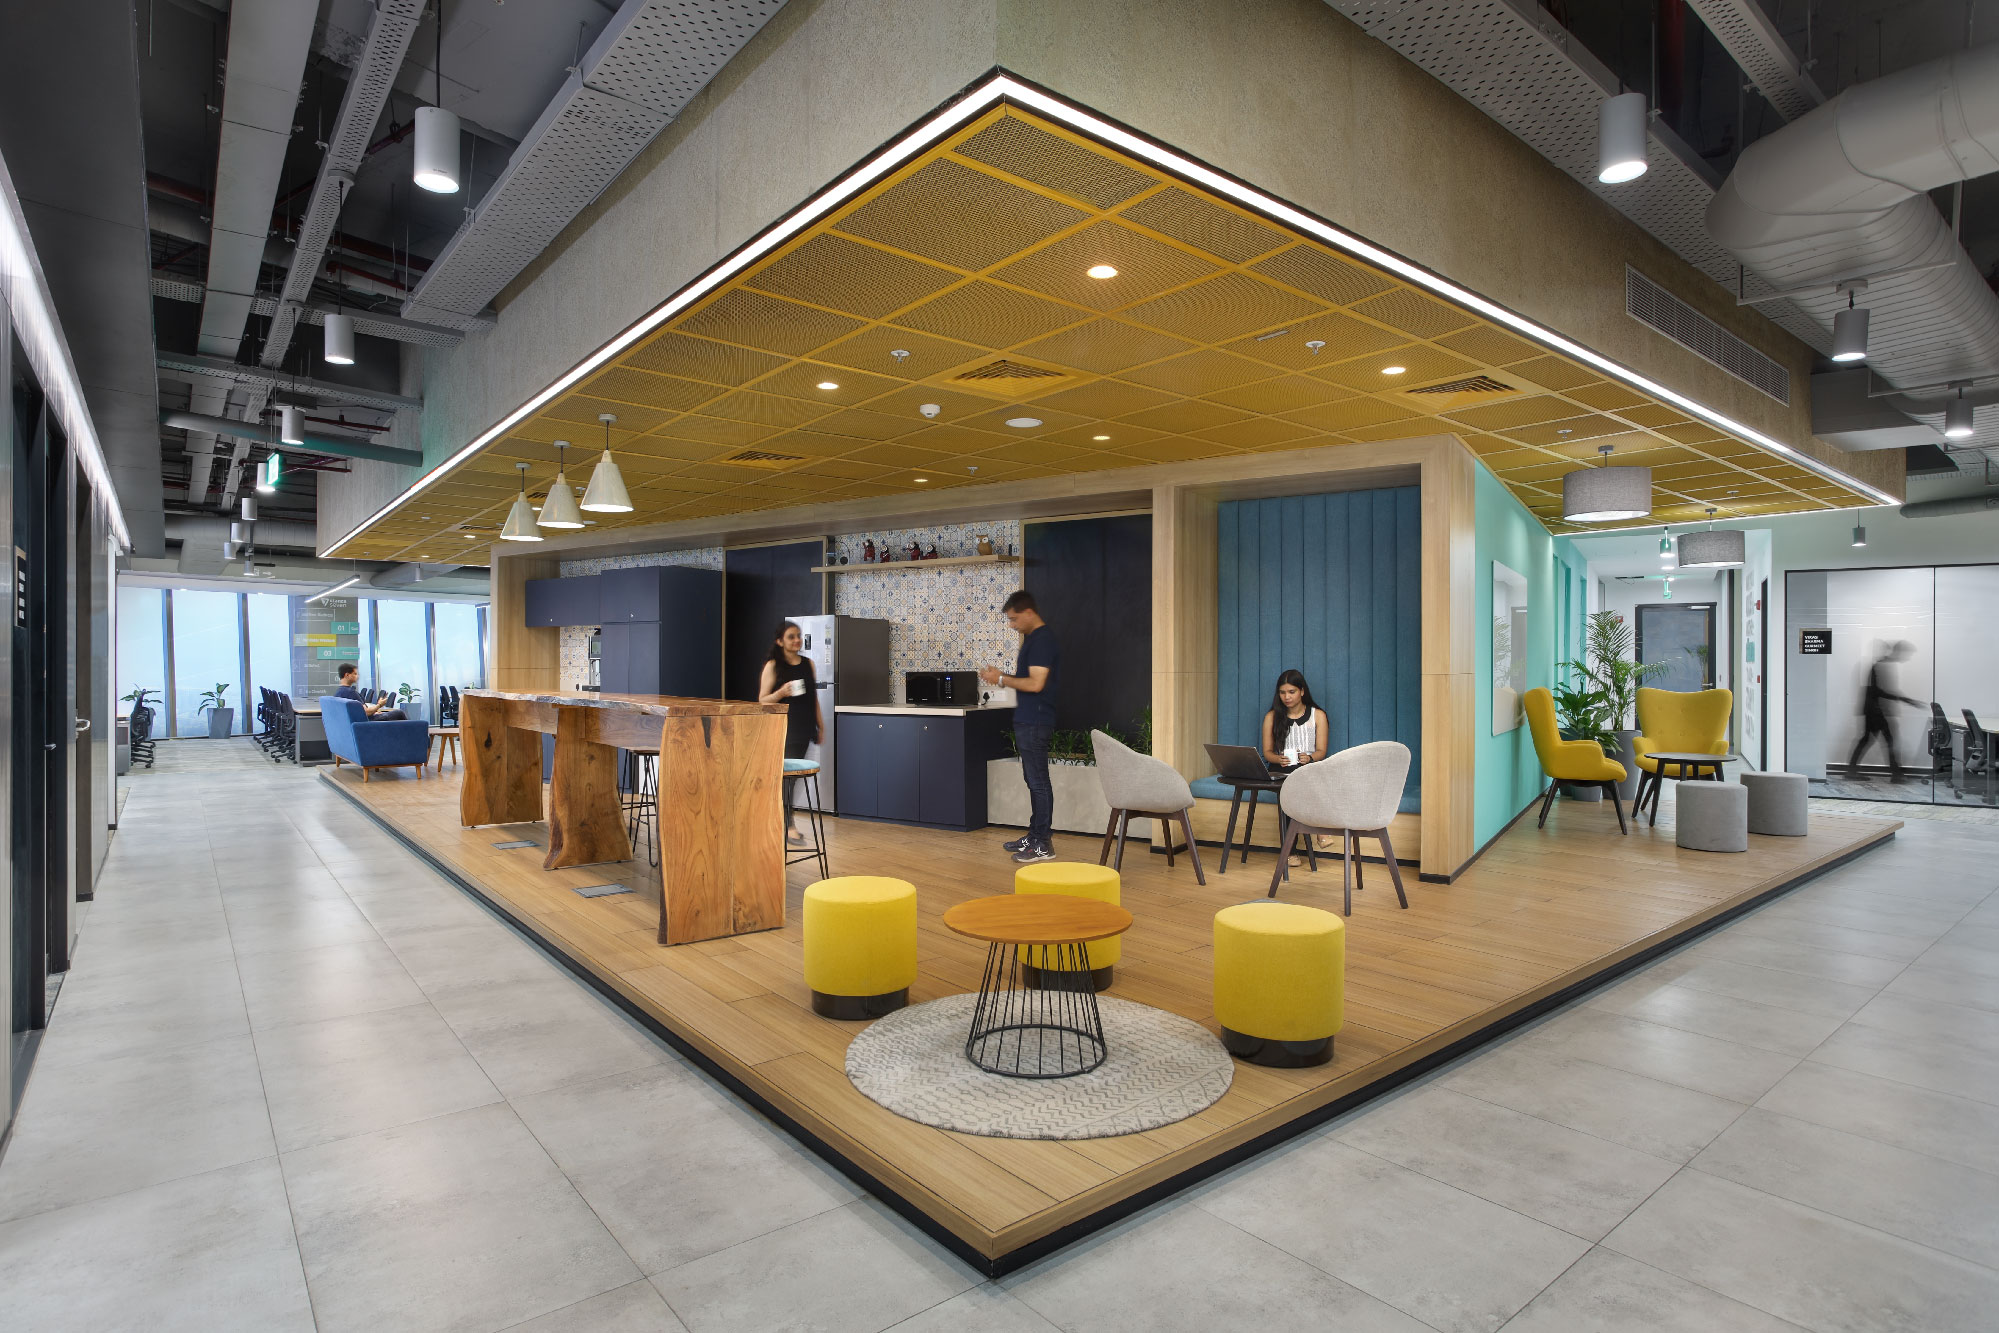 How interior design impacts well-being and productivity in the workplace